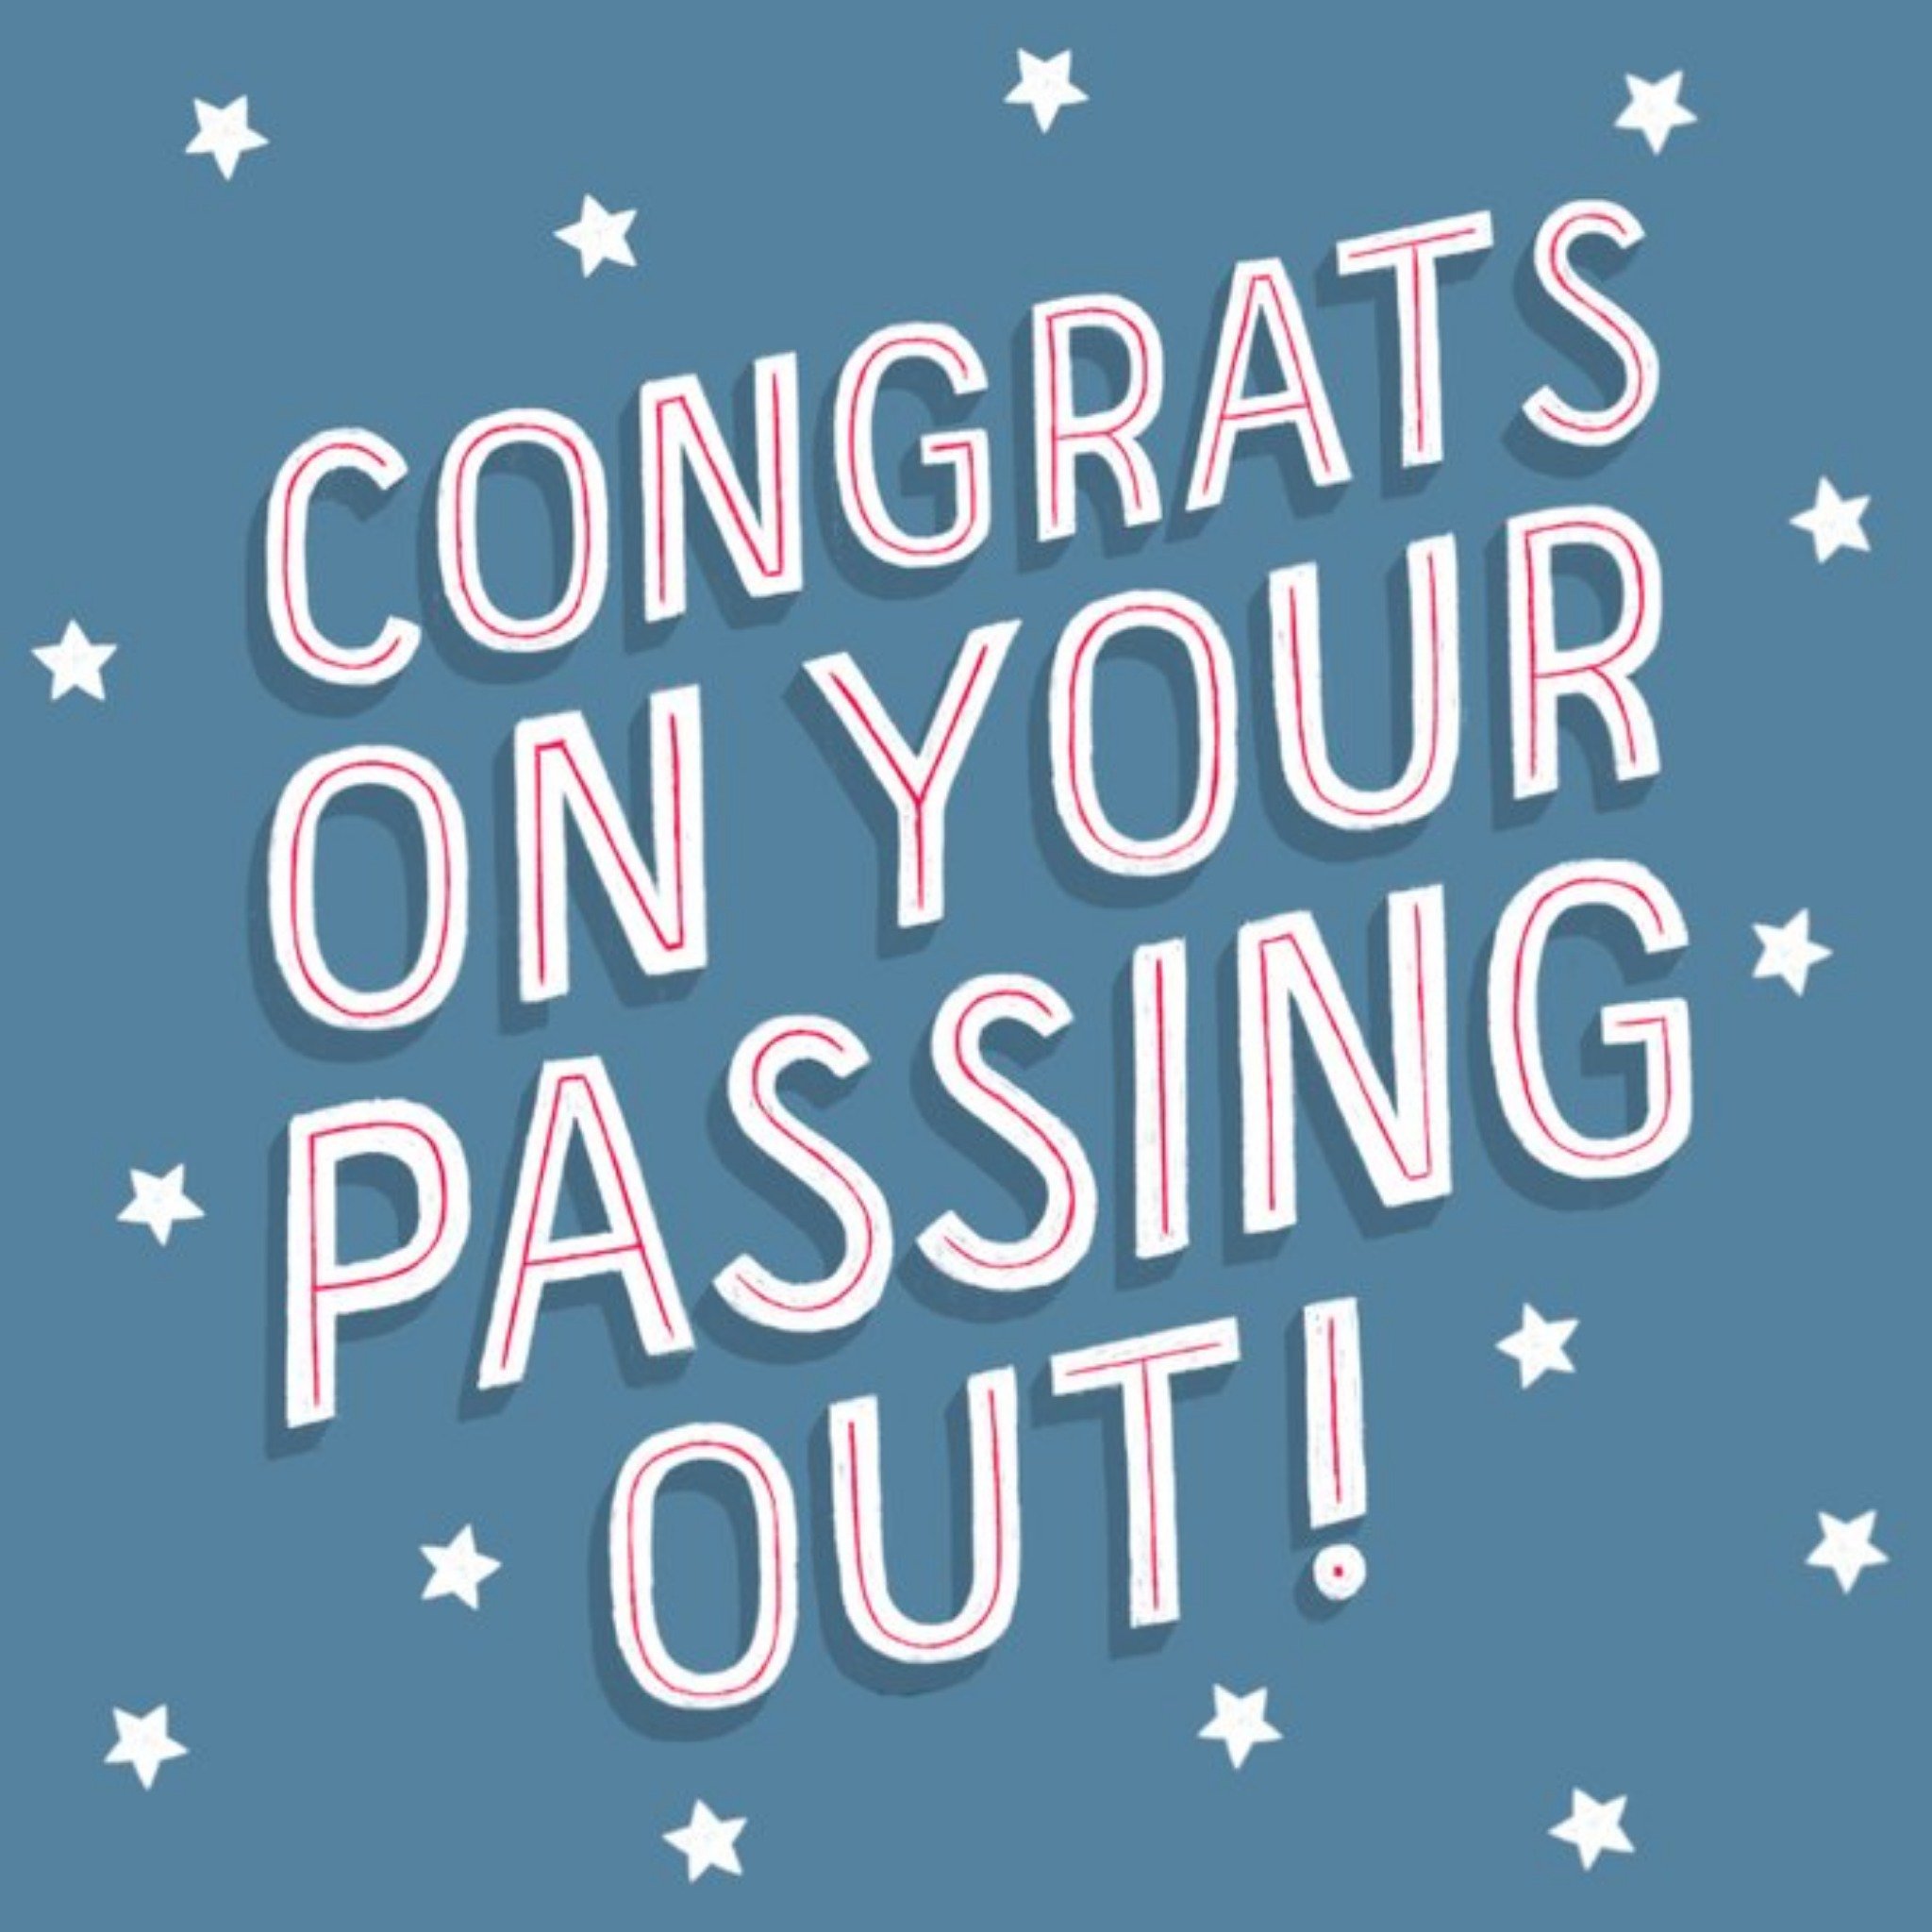 Moonpig Typographic Congrats On Your Passing Out Exams Card, Large